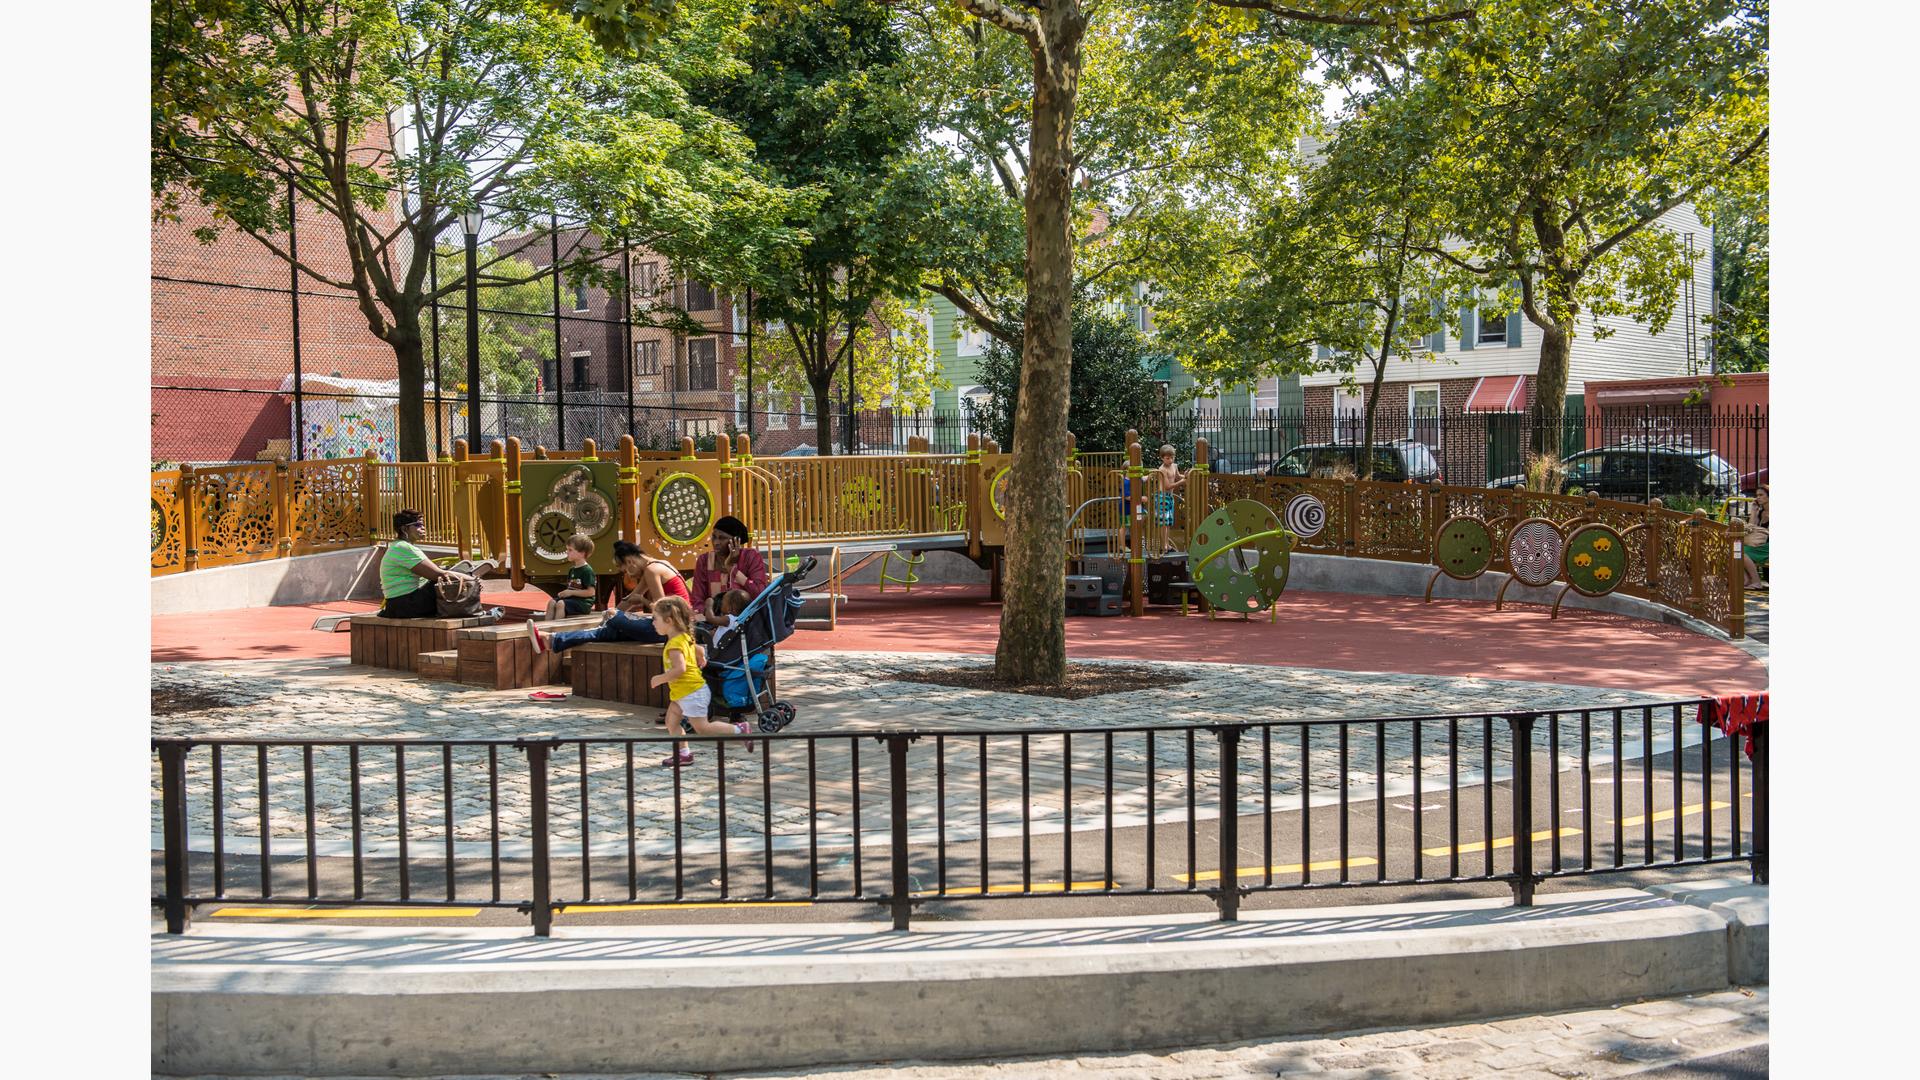 A group o fpeople sit on wooden benches under tree canopies, as a little girl in a yellow shirt runs by on the playground. On the play structure the boys stand at the top of the stairs together.